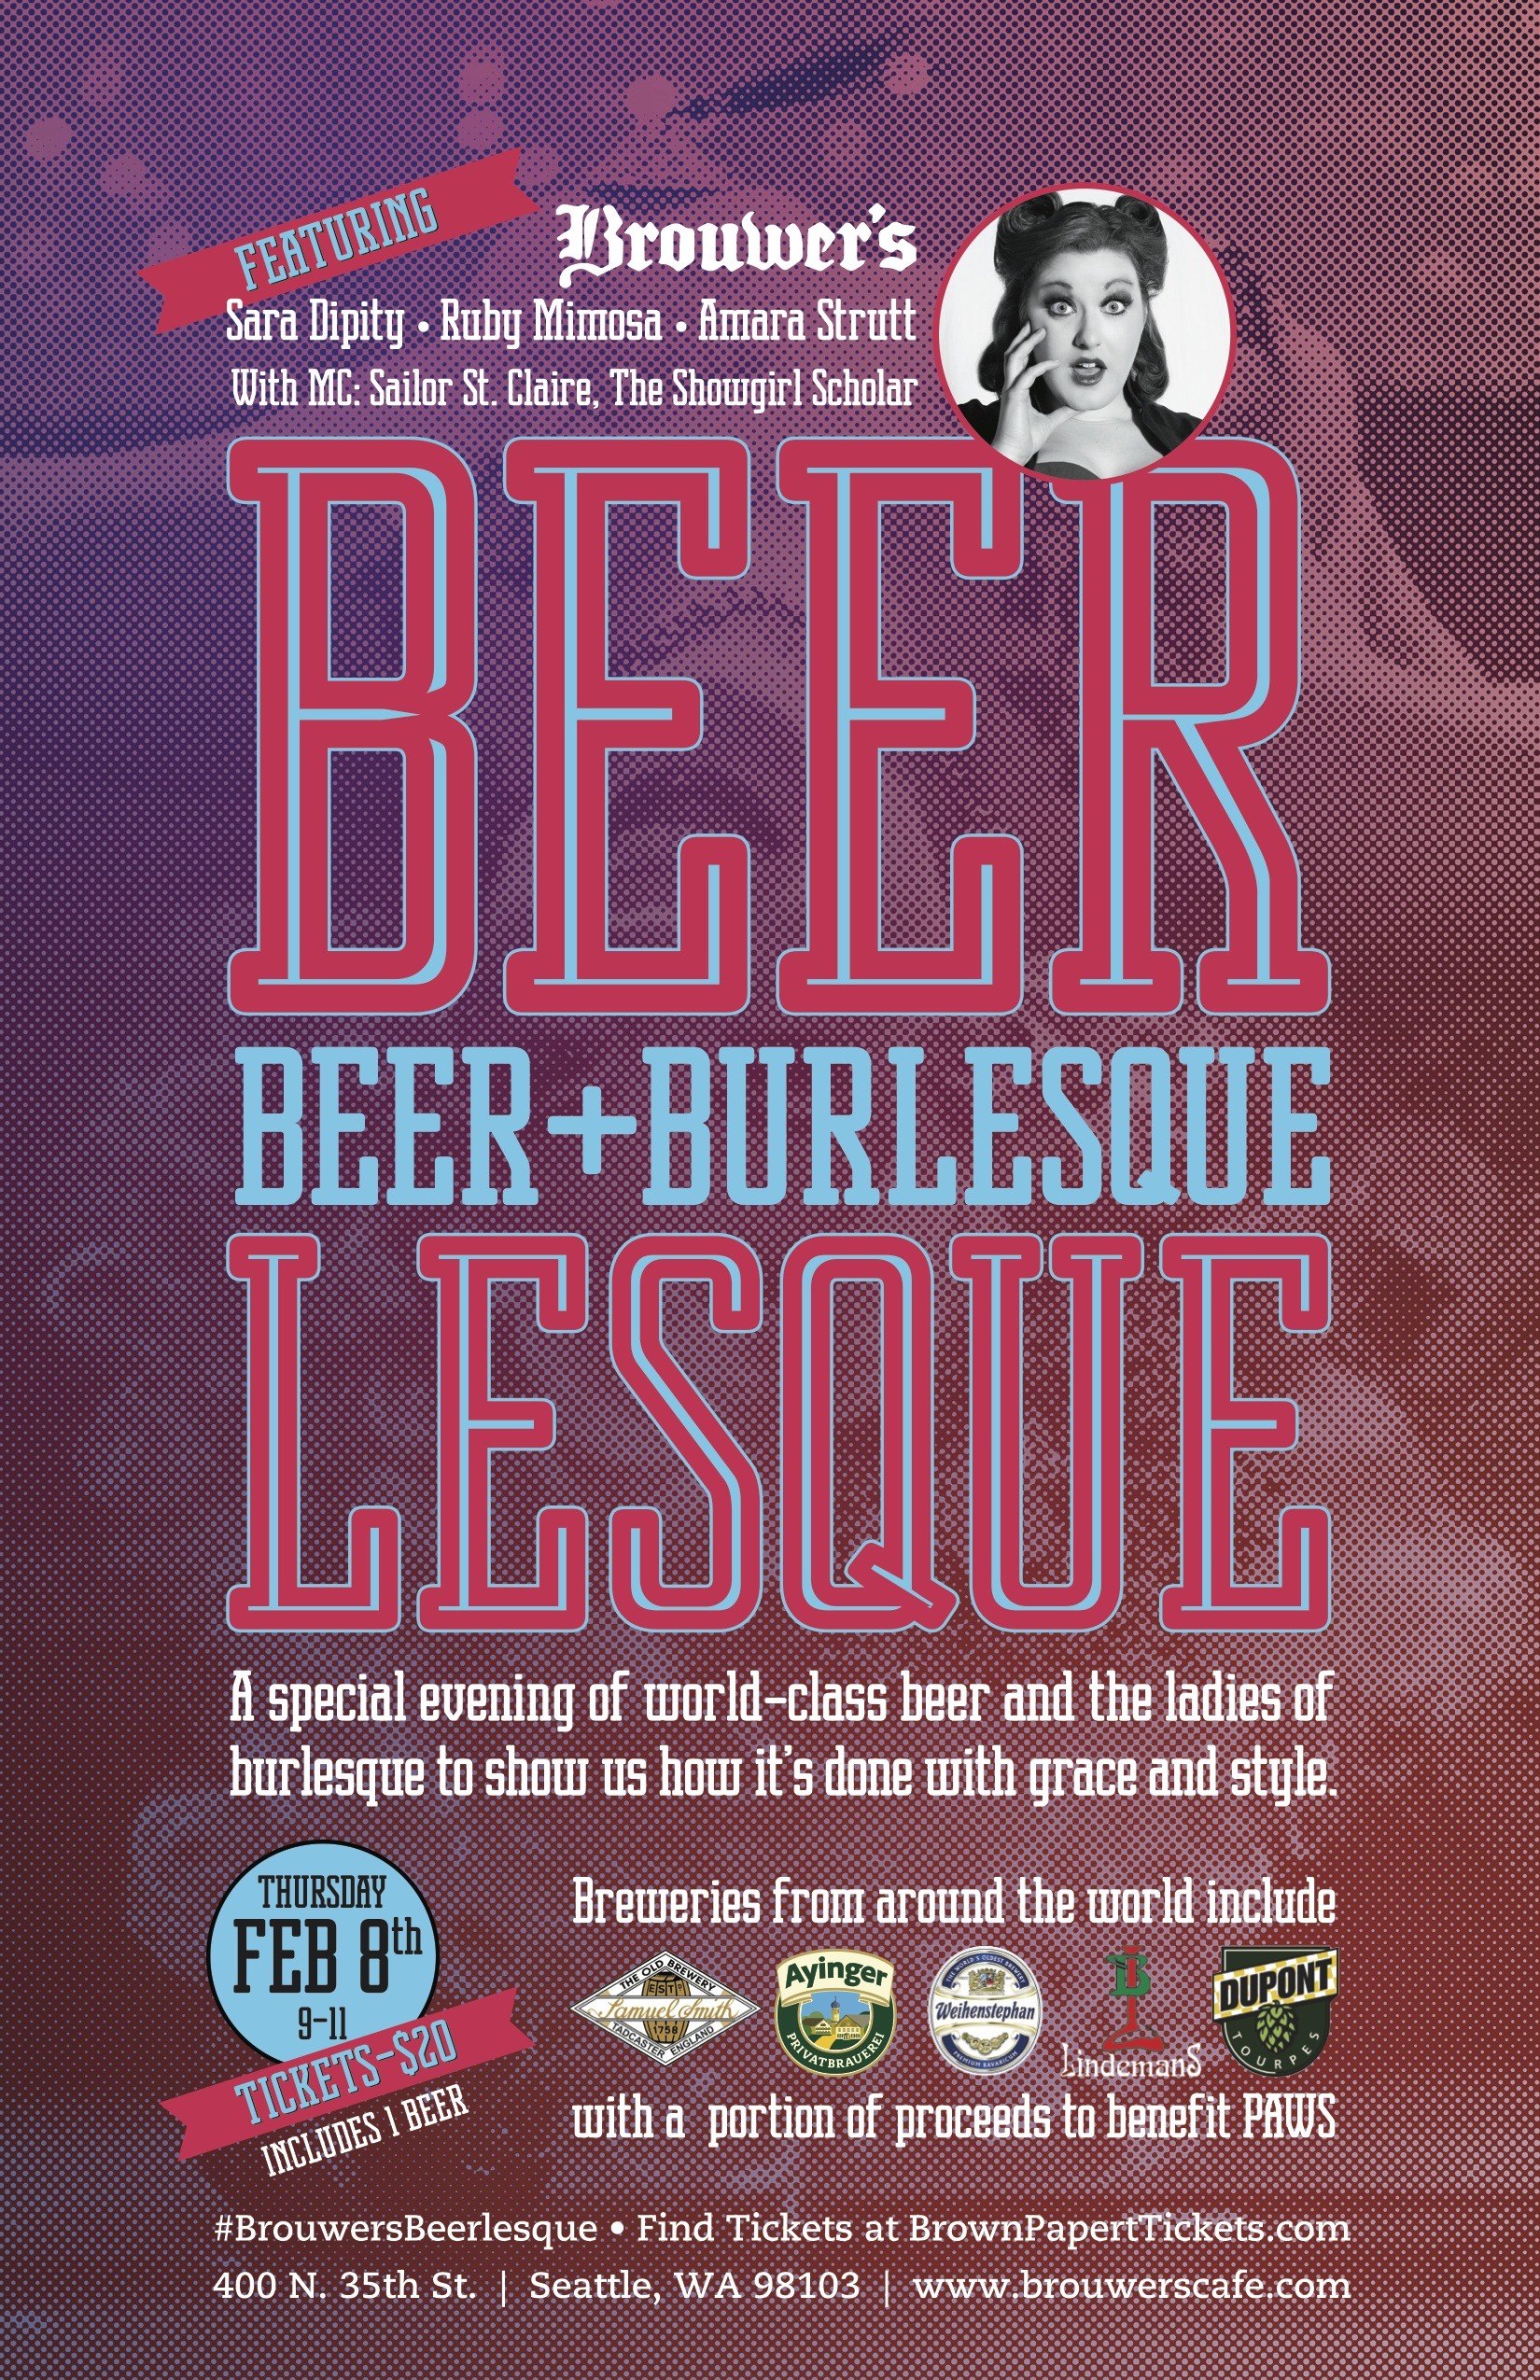 Thursday, February 8th 9pm-11pm, Beerlesque